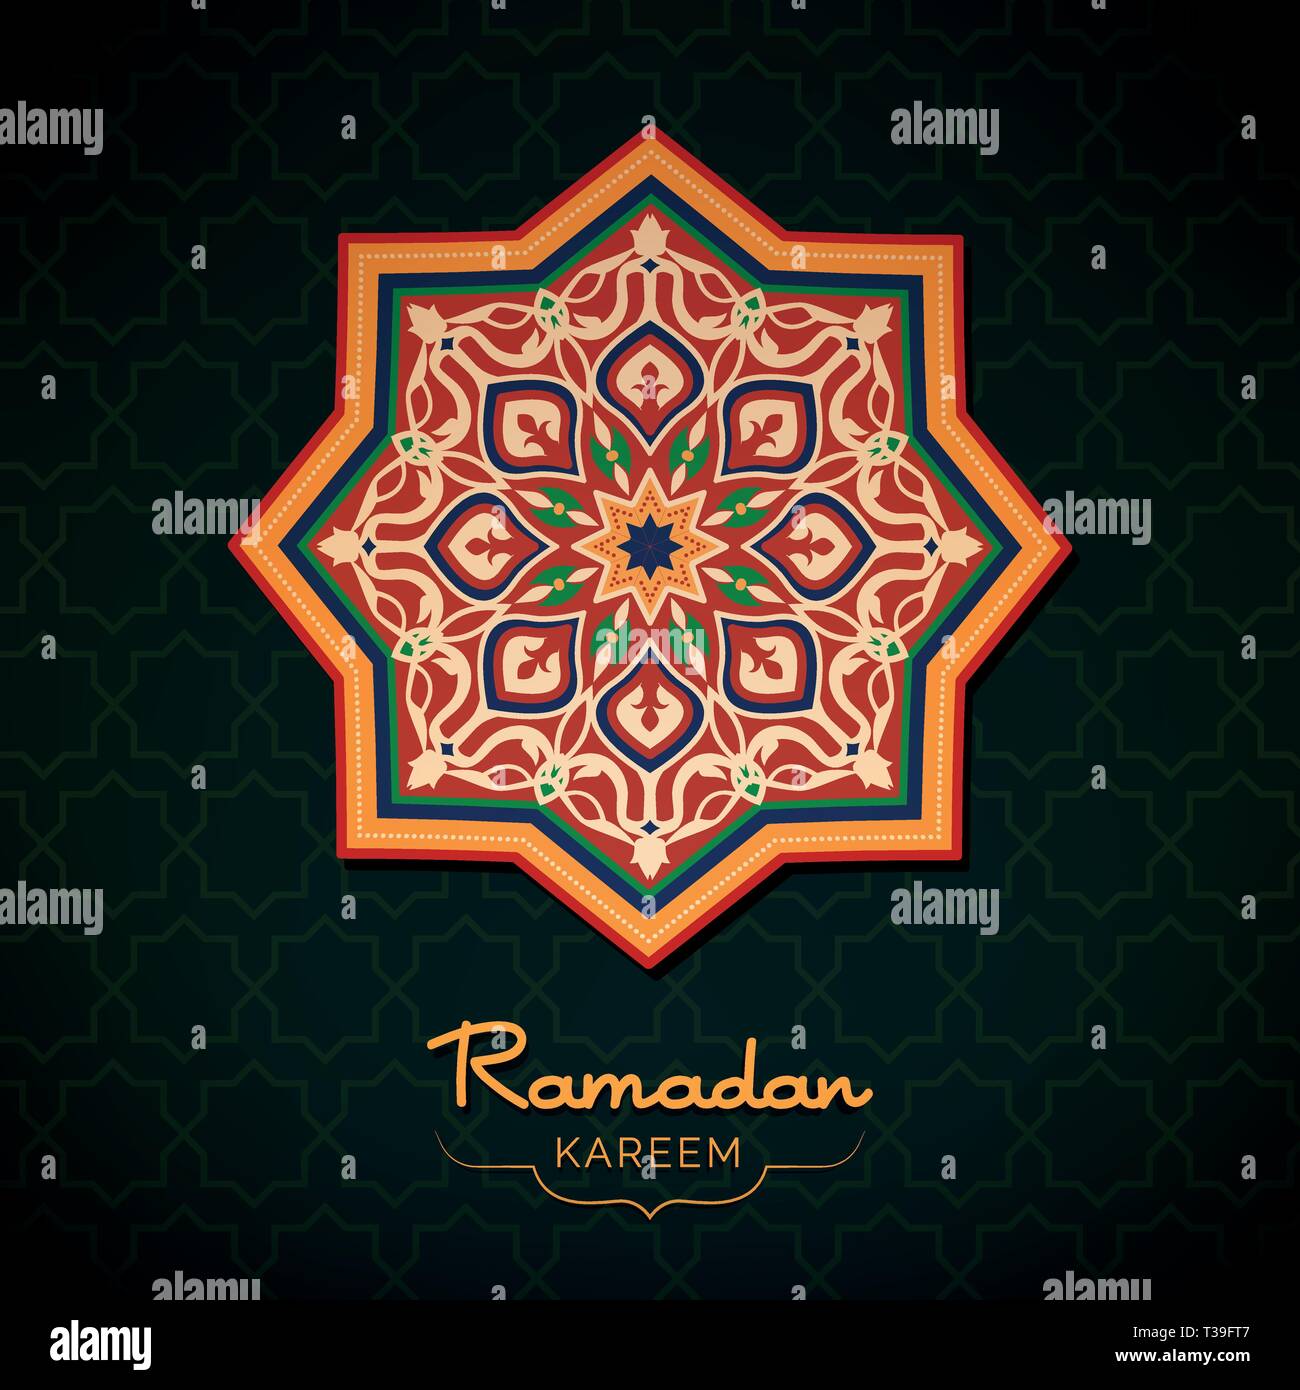 Ramadan Kareem wishes card with middle eastern style decoration, Islamic culture and religion concept Stock Vector